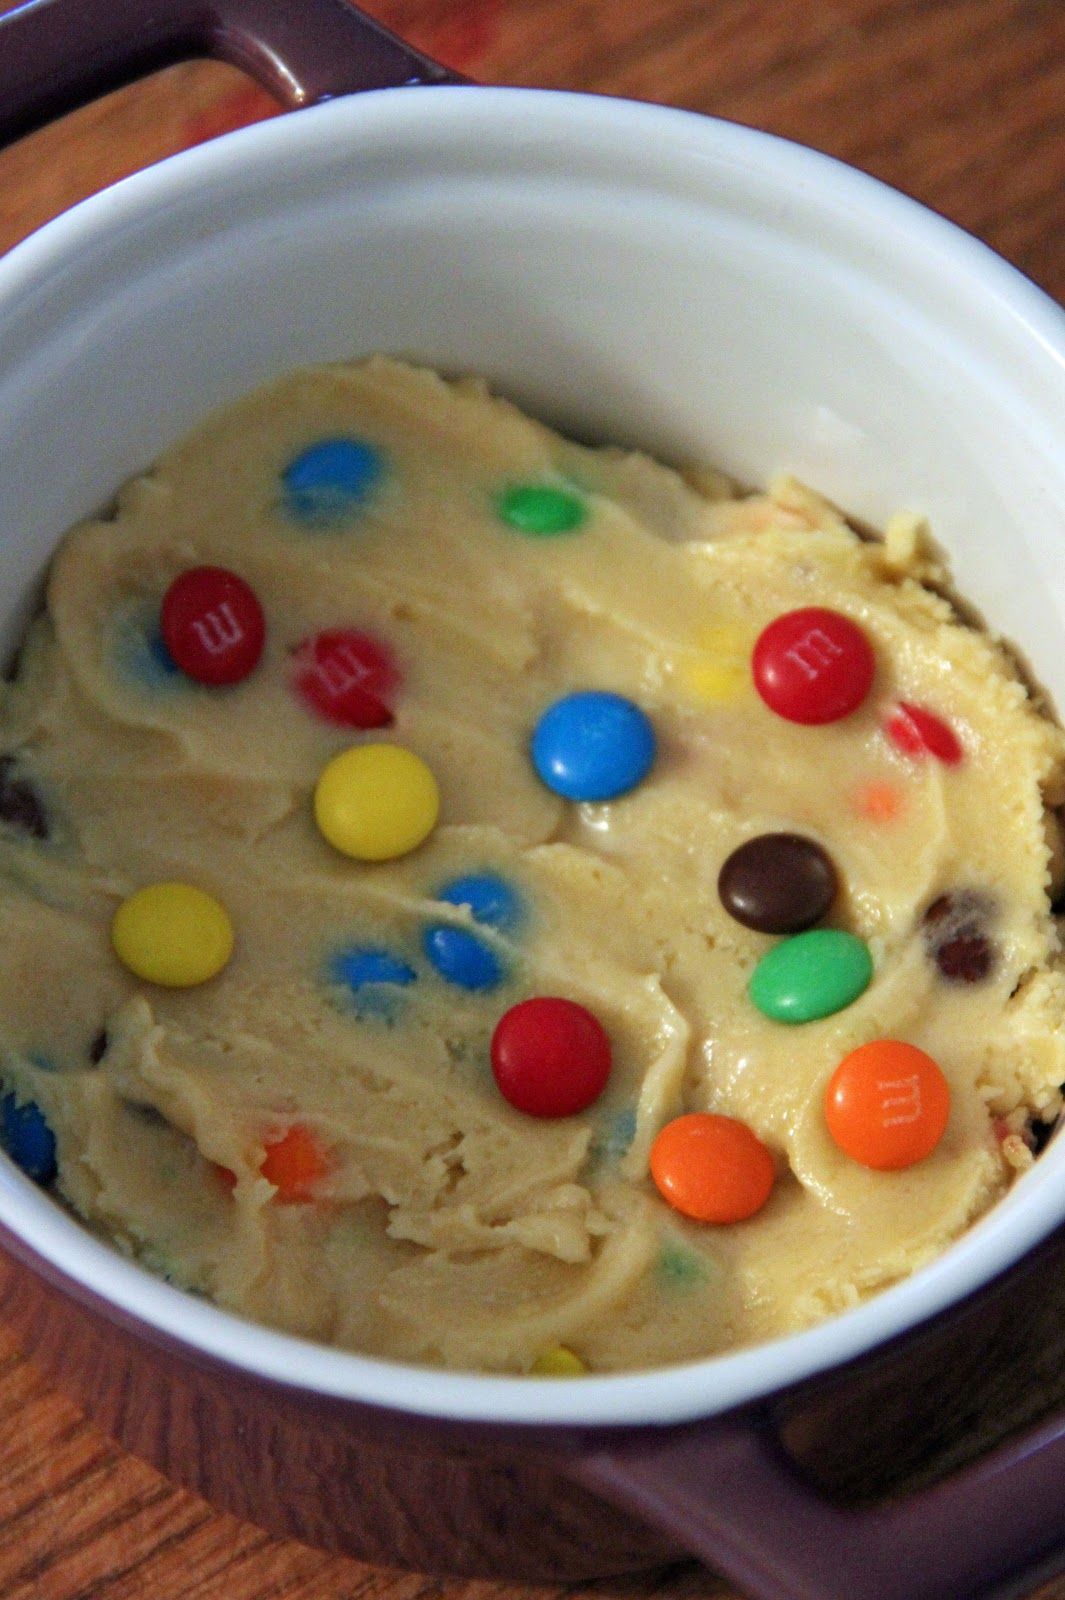 5 Minute Chocolate Chip Cookie in a mug. – Literally went & tried this within mi